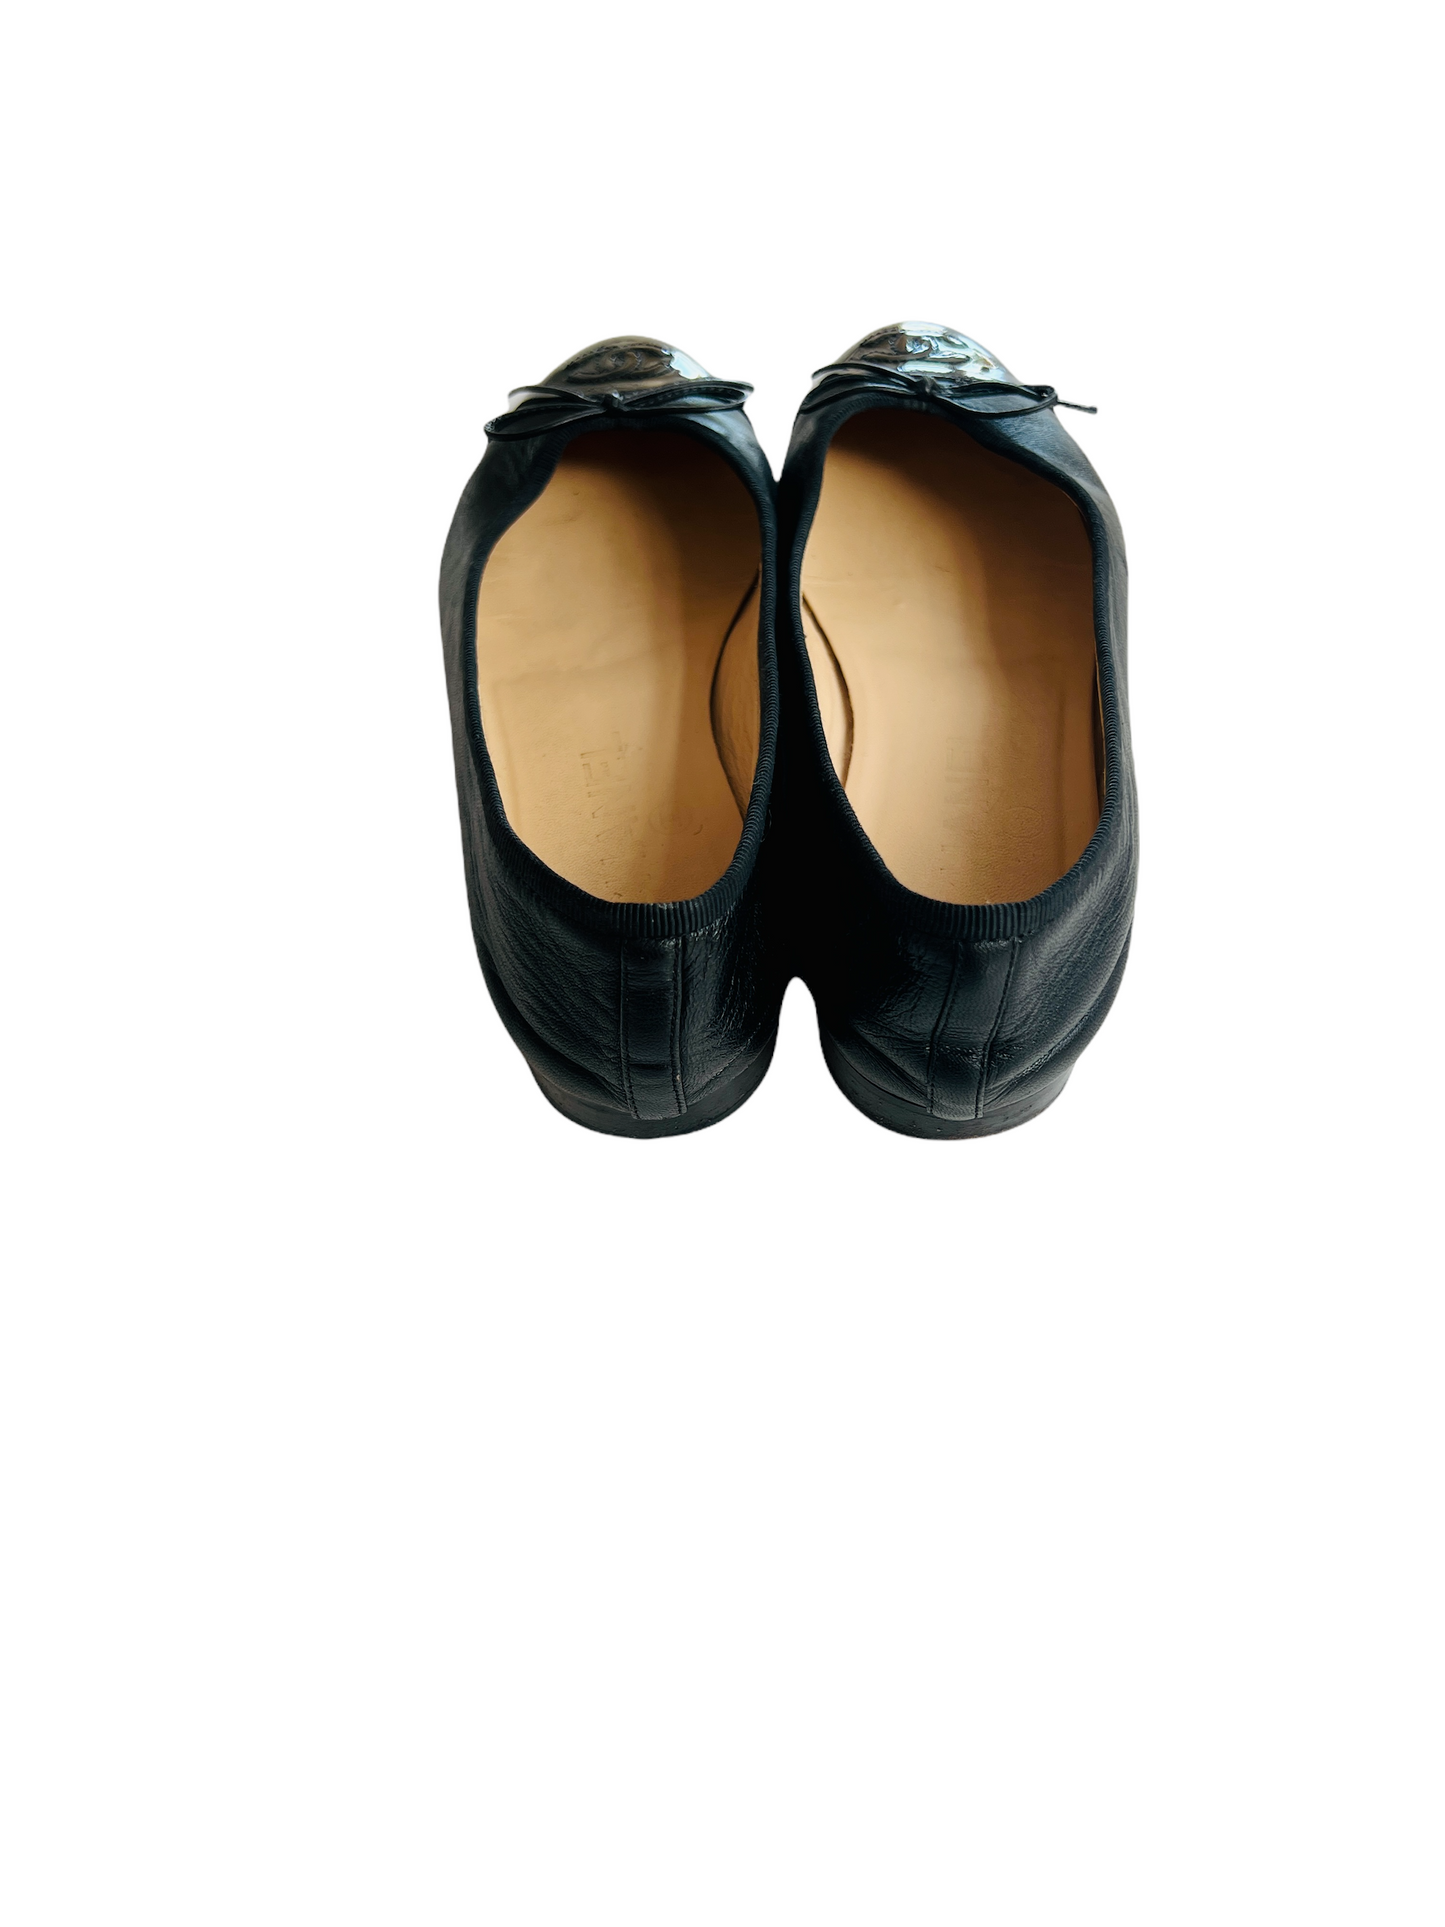 Black Leather Ballerina Shoes - 6